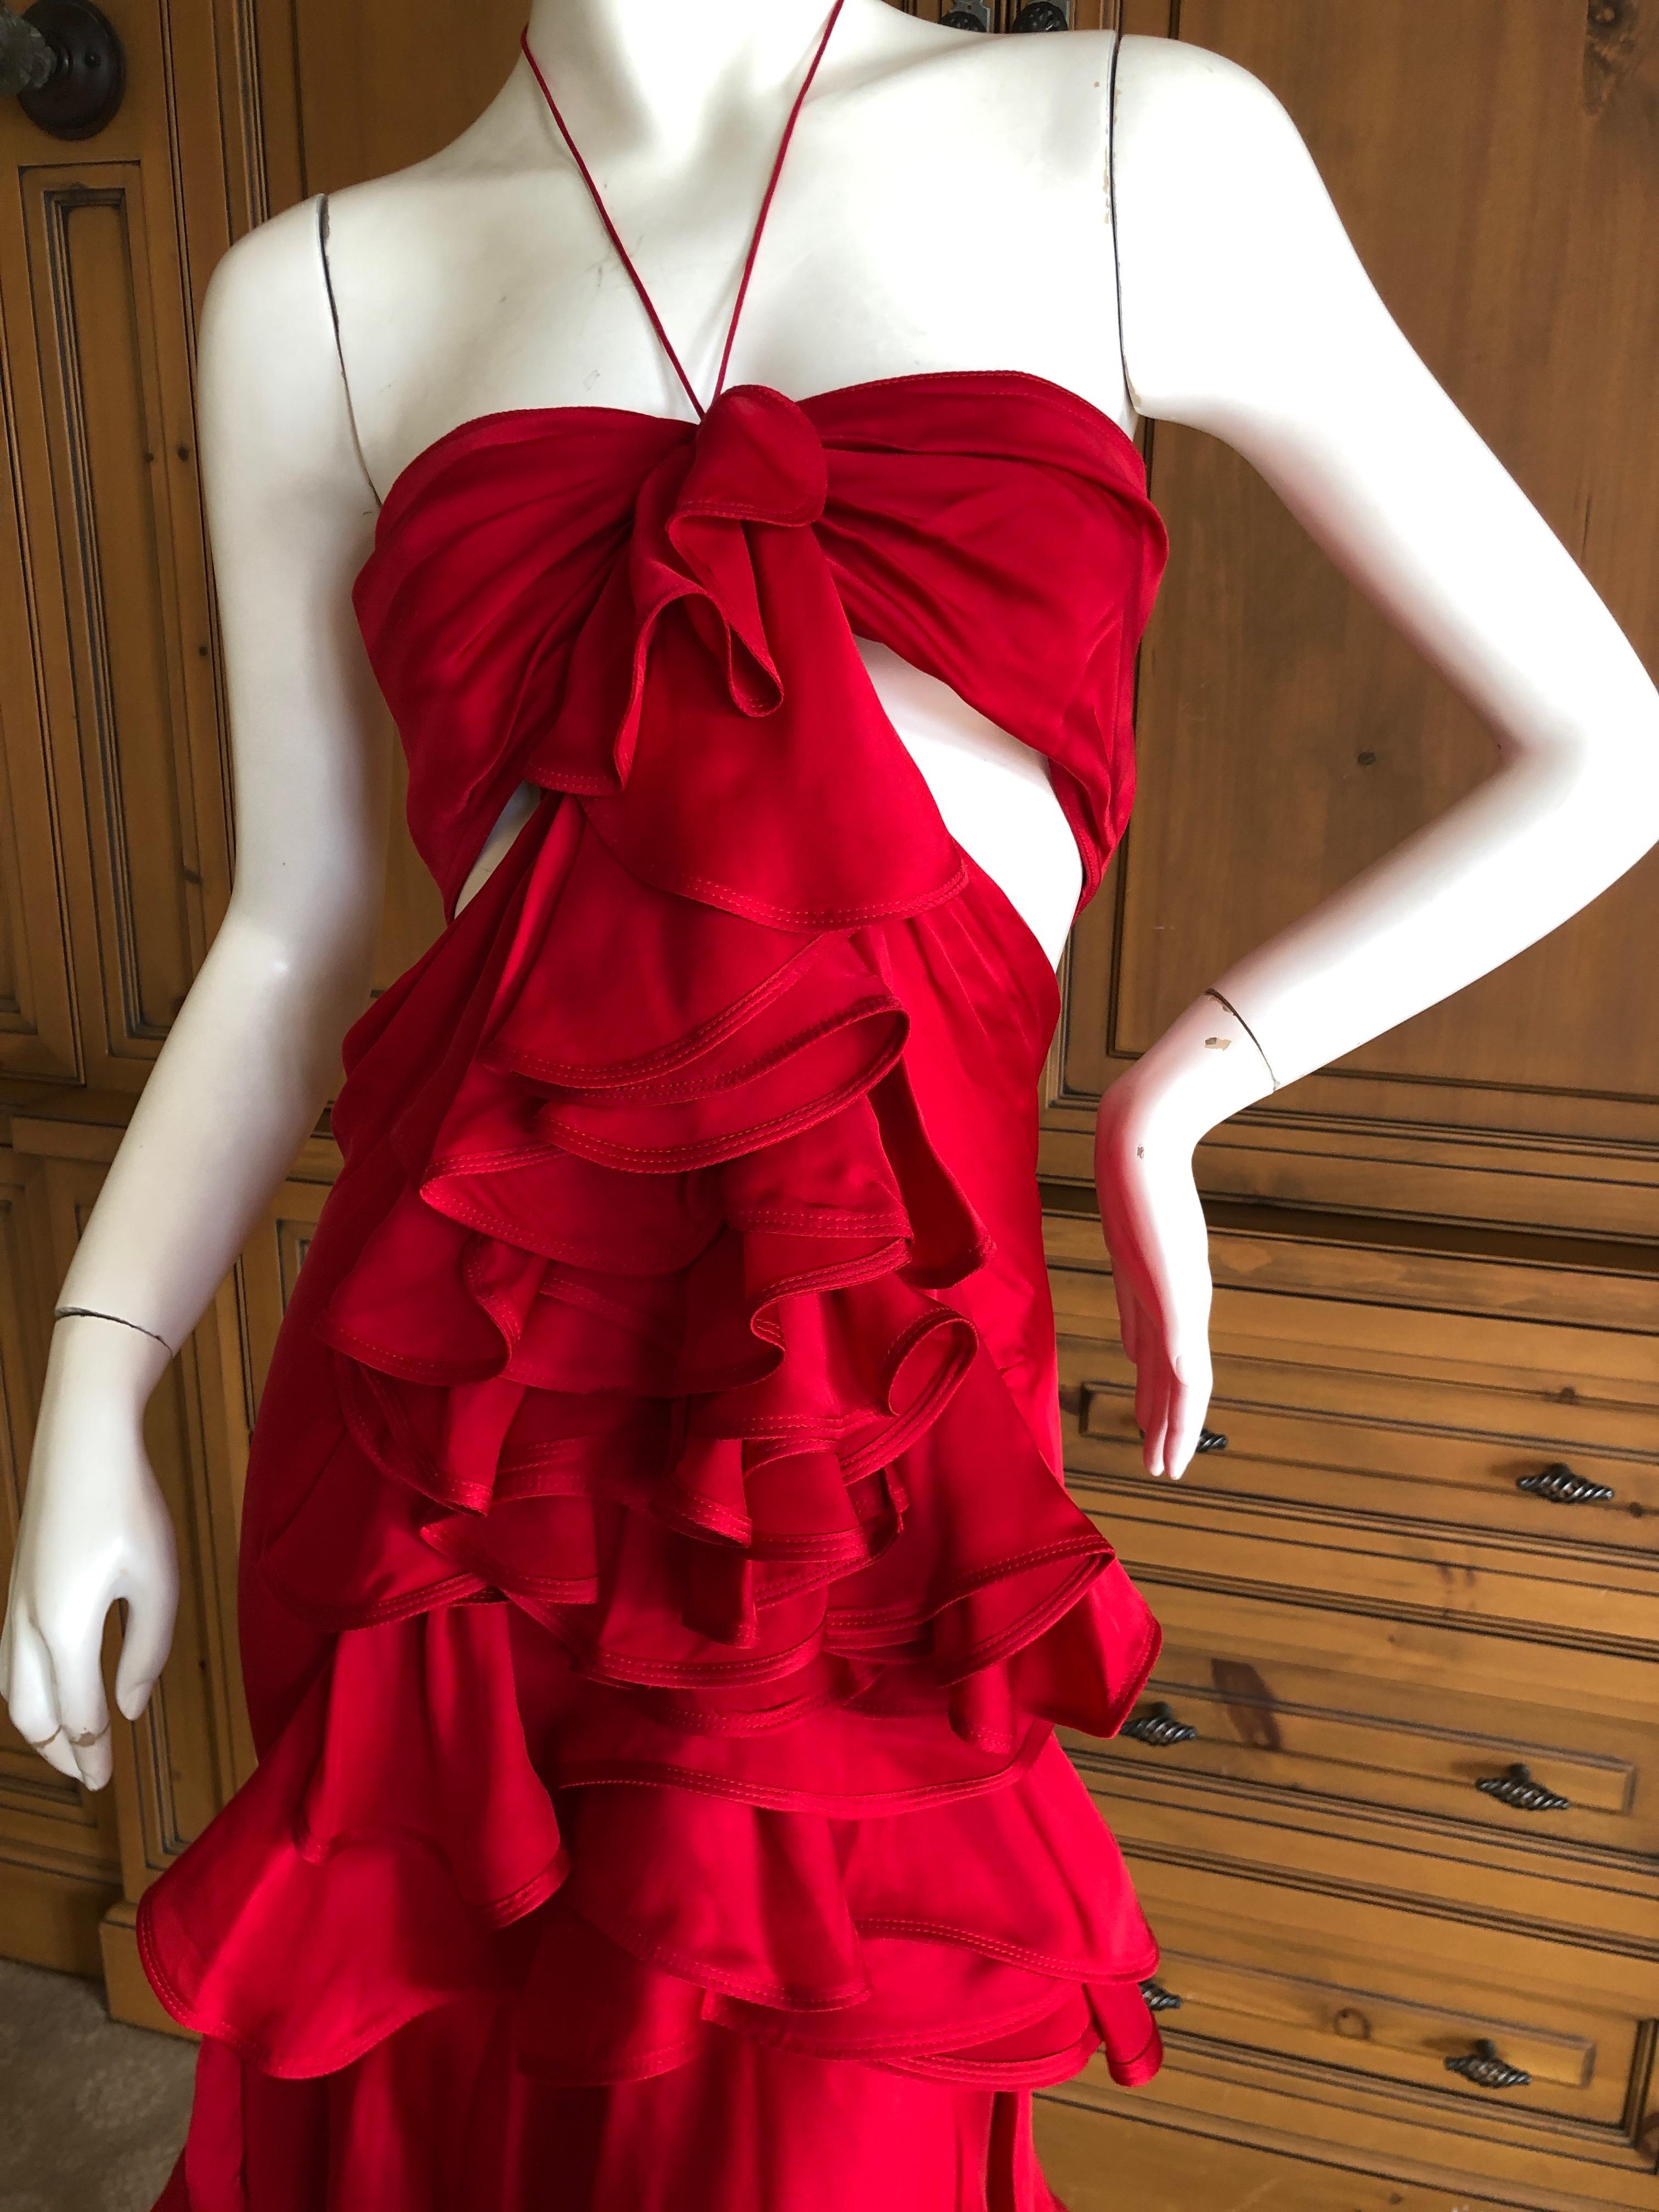 Yves Saint Laurent by Tom Ford 2003 Ruffled Red Silk Dress Size 40 In Excellent Condition For Sale In Cloverdale, CA